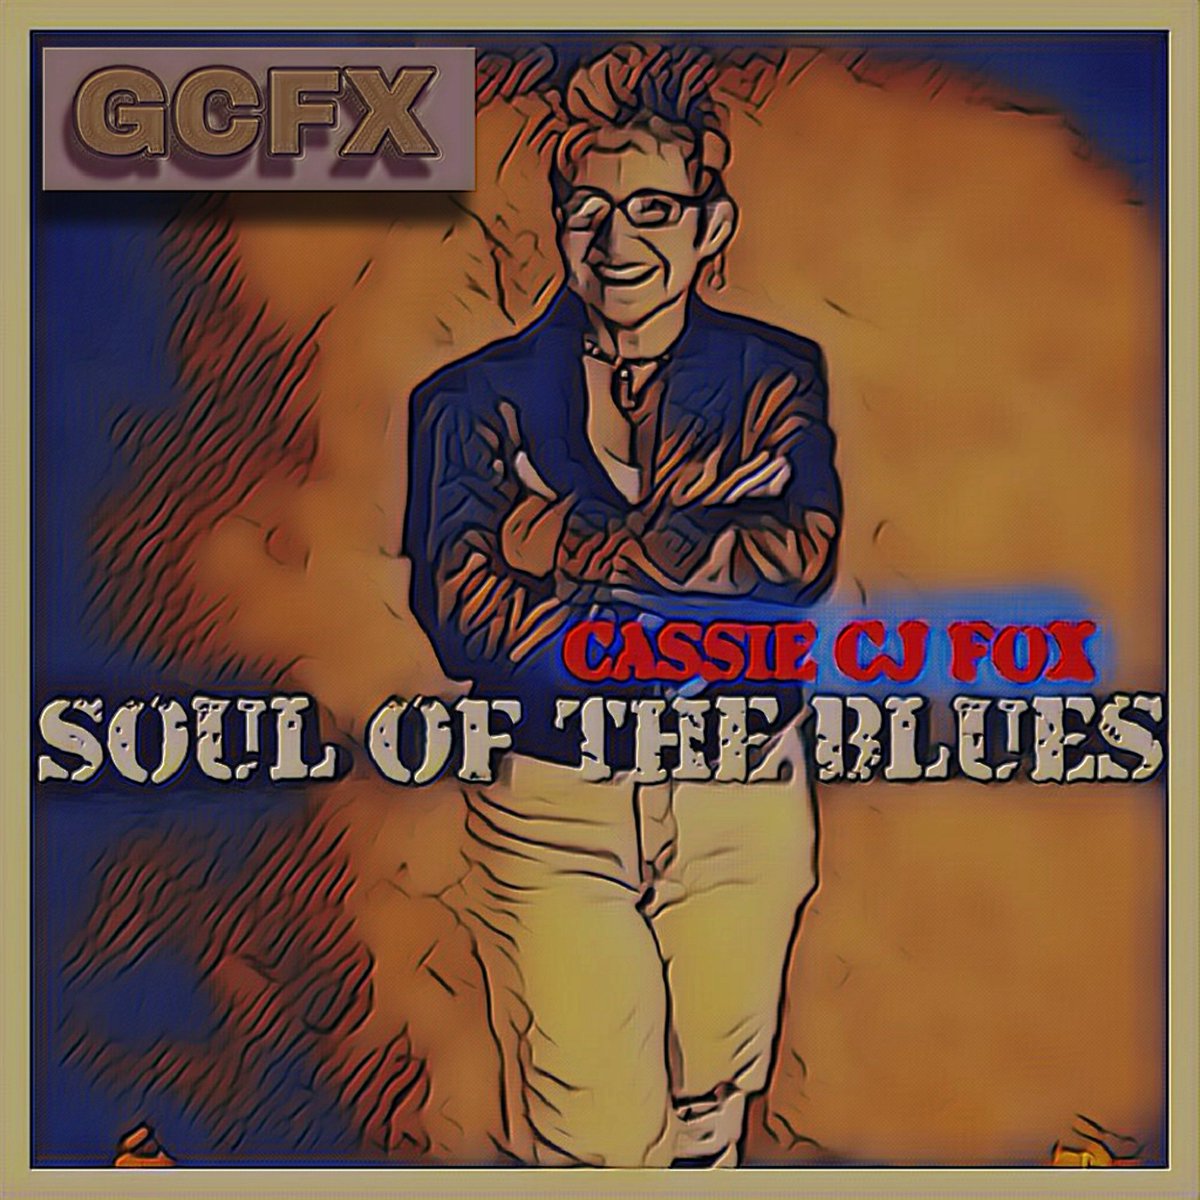 #FridayFeeling More jams on #FeelGoodFriday Get Lit With Me & That Friday Vibe #FunkyFriday @ 12-2pm EST Syndicated 'Soul Of The Blues With Cassie CJ Fox' live365.com/station/GCFX-G………………………………………………… #SouthernSounds #LunchBreak #GrooveCityFXRadio #GrownFolksMusic